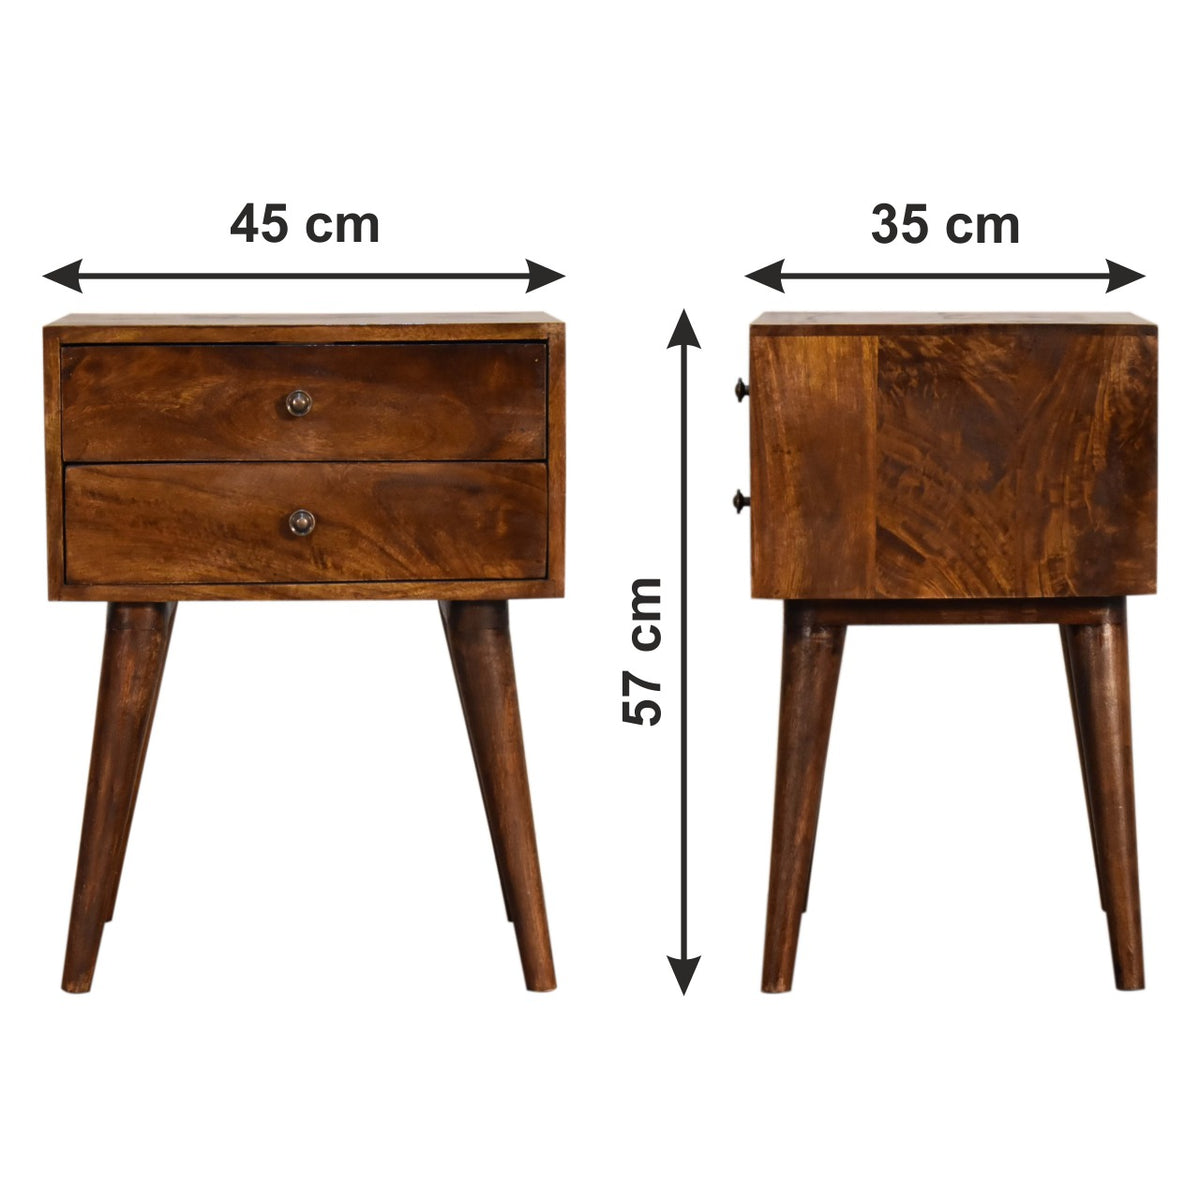 Tall dark wooden bedside table 2 drawer small brown wood bedside table